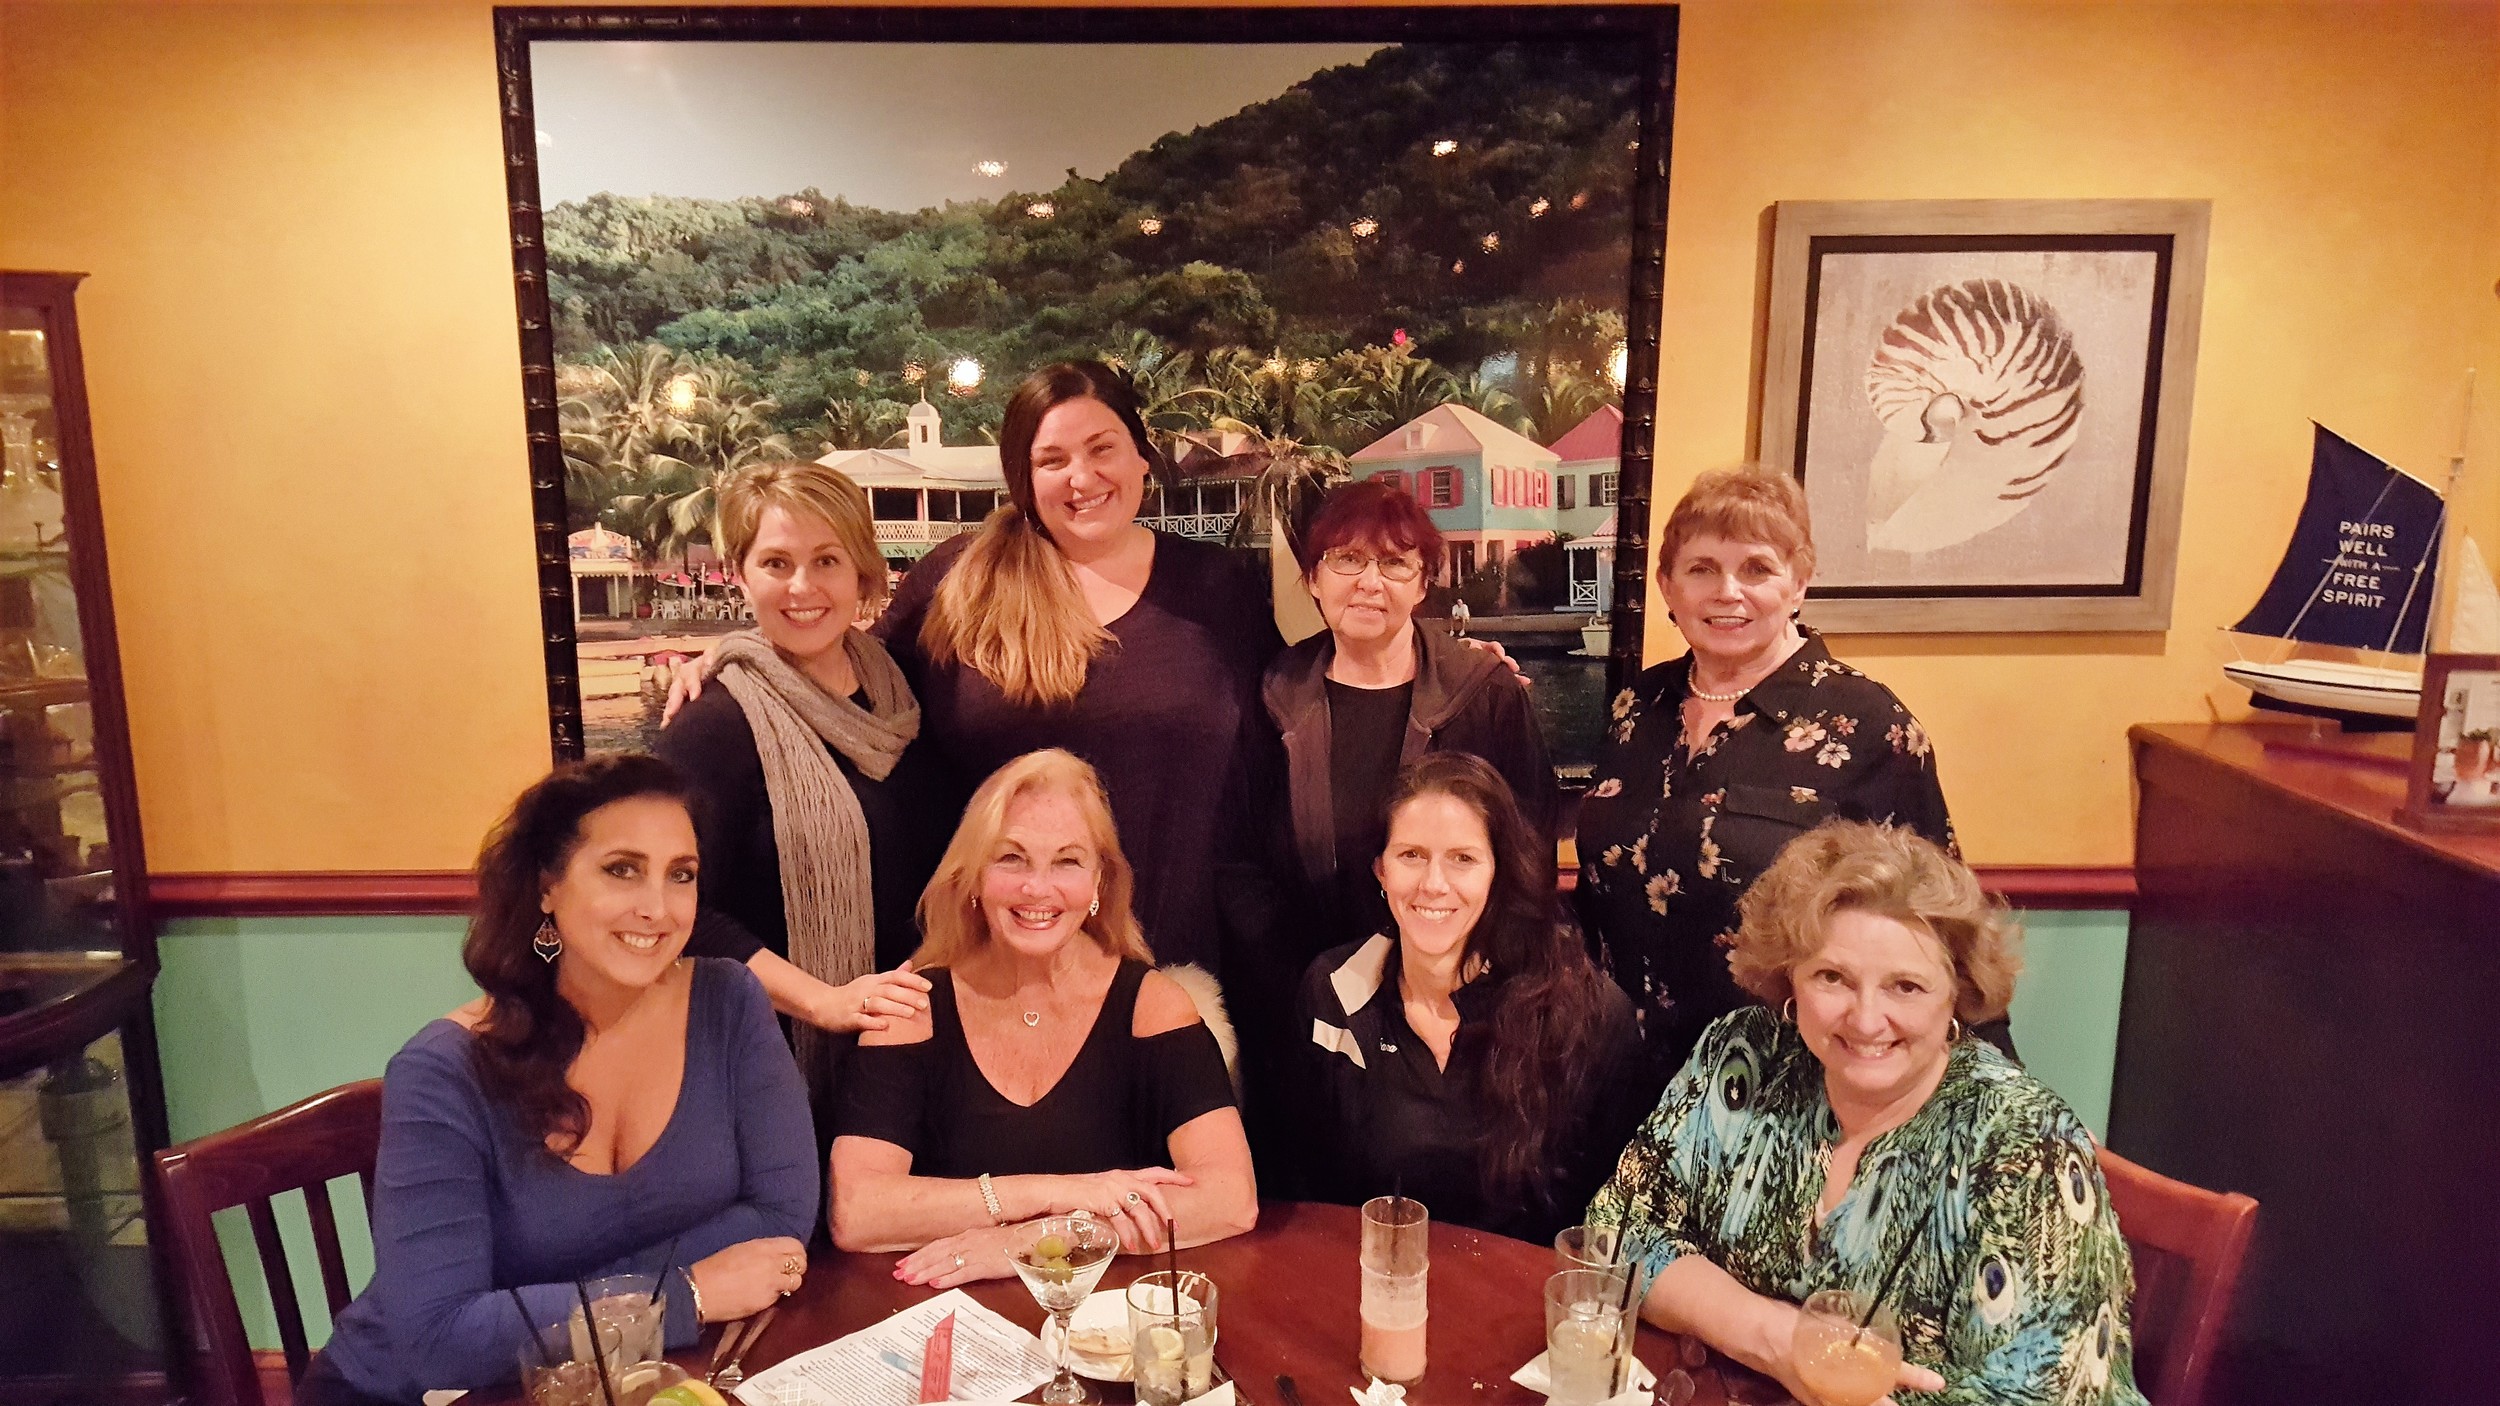 Members of the Womens Food Alliance: Seated, Tammy Cipriani, Leigh Cort, Dana Stallings and Belinda Hulin. Standing: Allie Olsen, Monica Stouder, Sherry Stoppelbein and Kathleen Hurley. Not pictured: Rebekah Lowry and Nancy Slatsky.

.